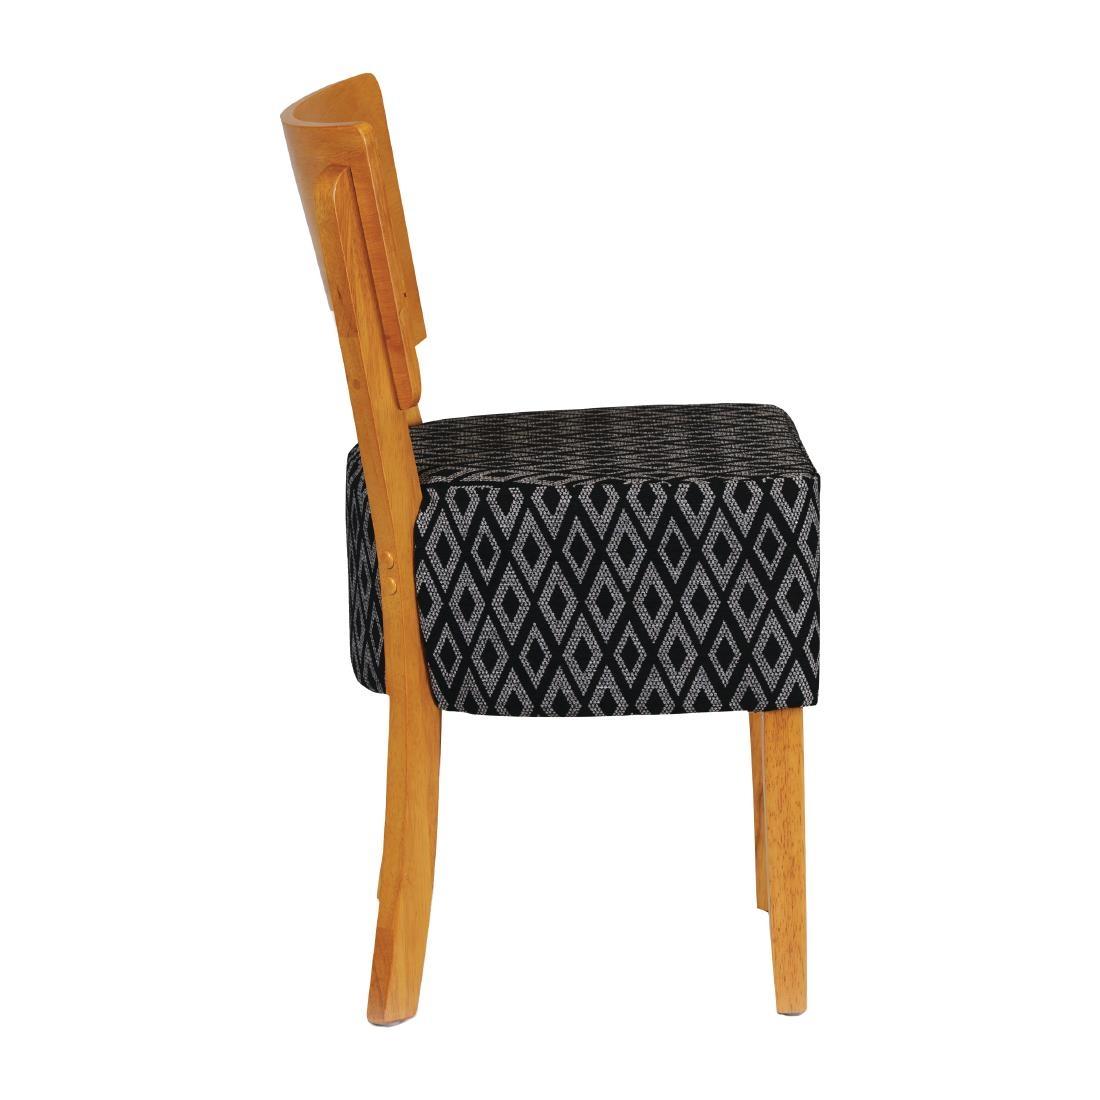 Asti Padded Soft Oak Dining Chair with Blue Diamond Deep Padded Seat and Back (Pack of 2) - FT426  - 3